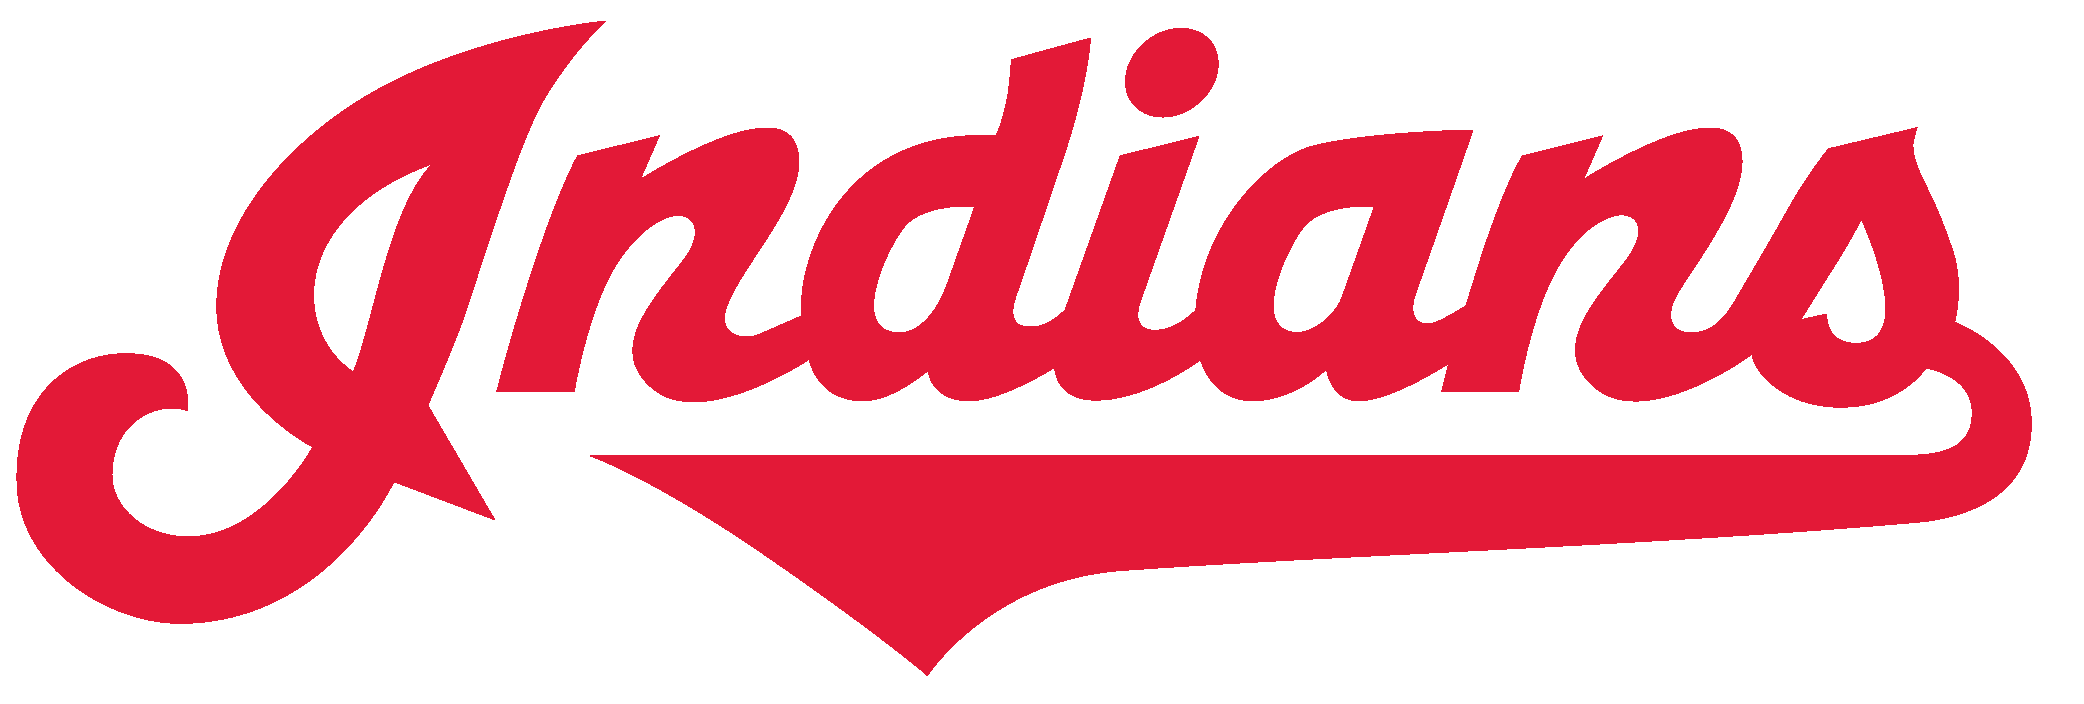 Cleveland Indians PNG HD Quality